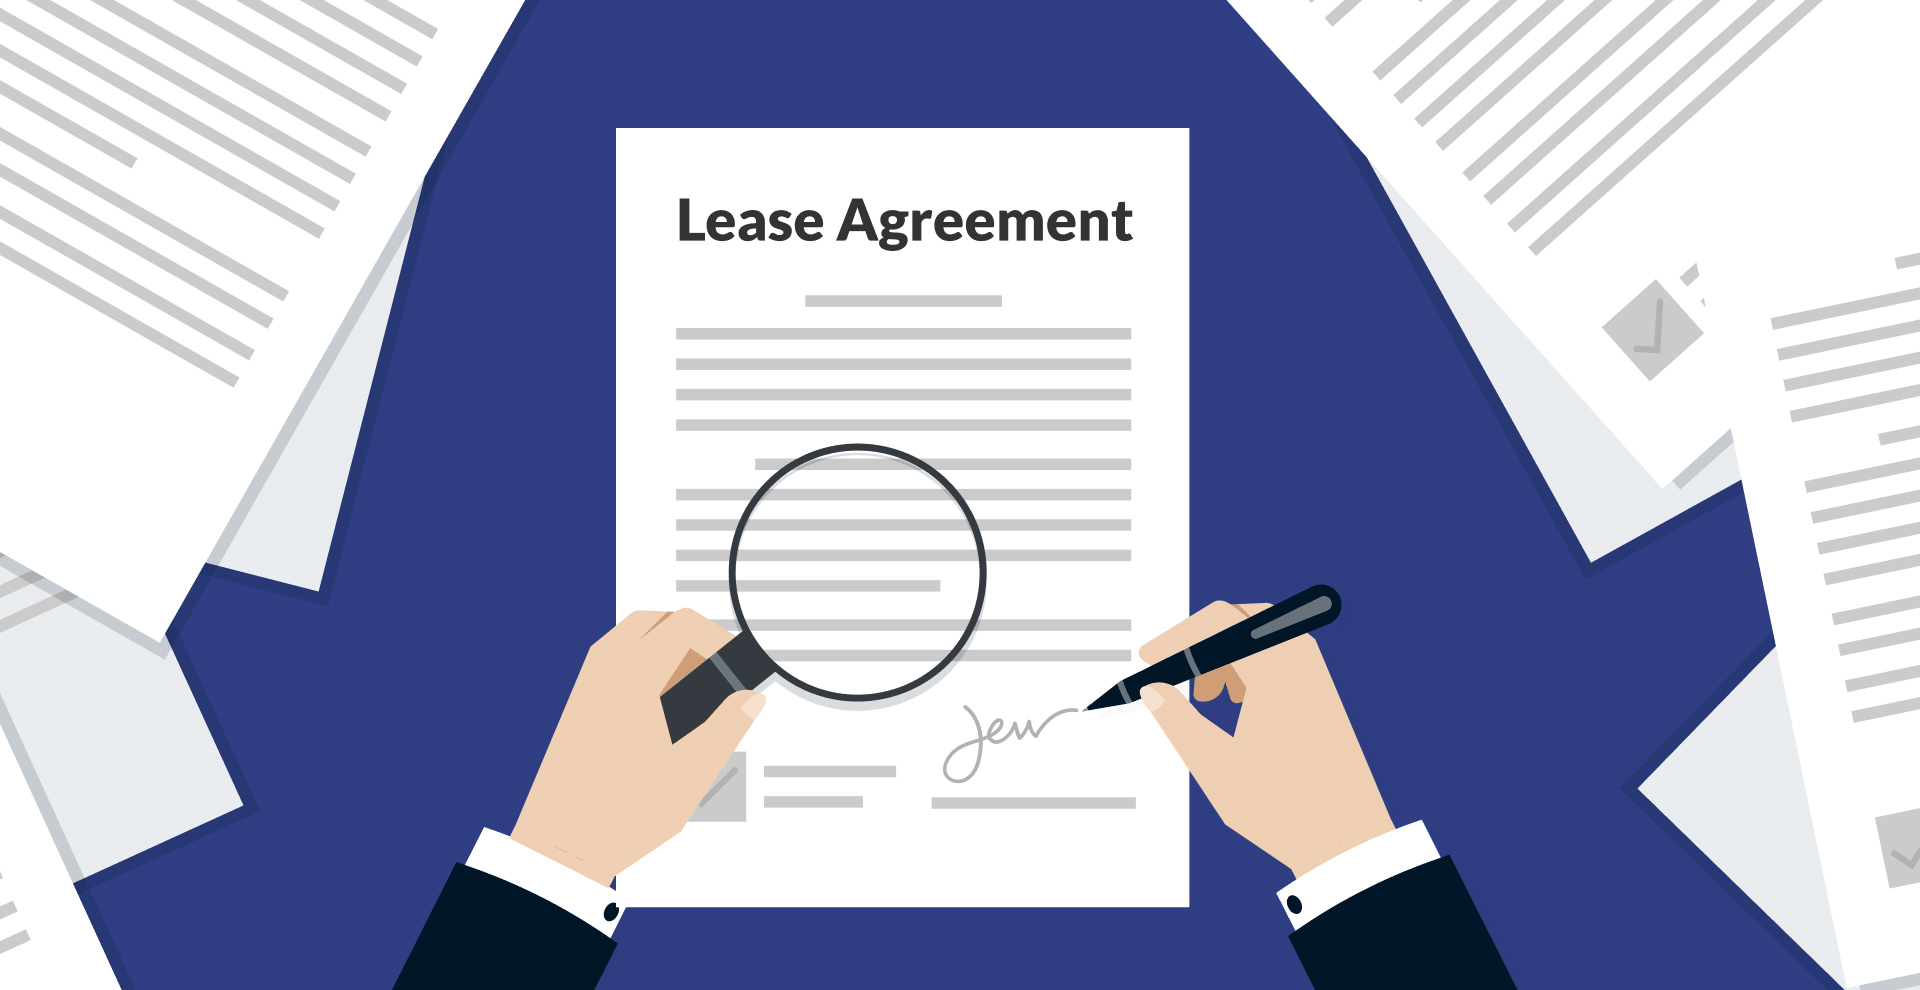 What is Equipment lease?